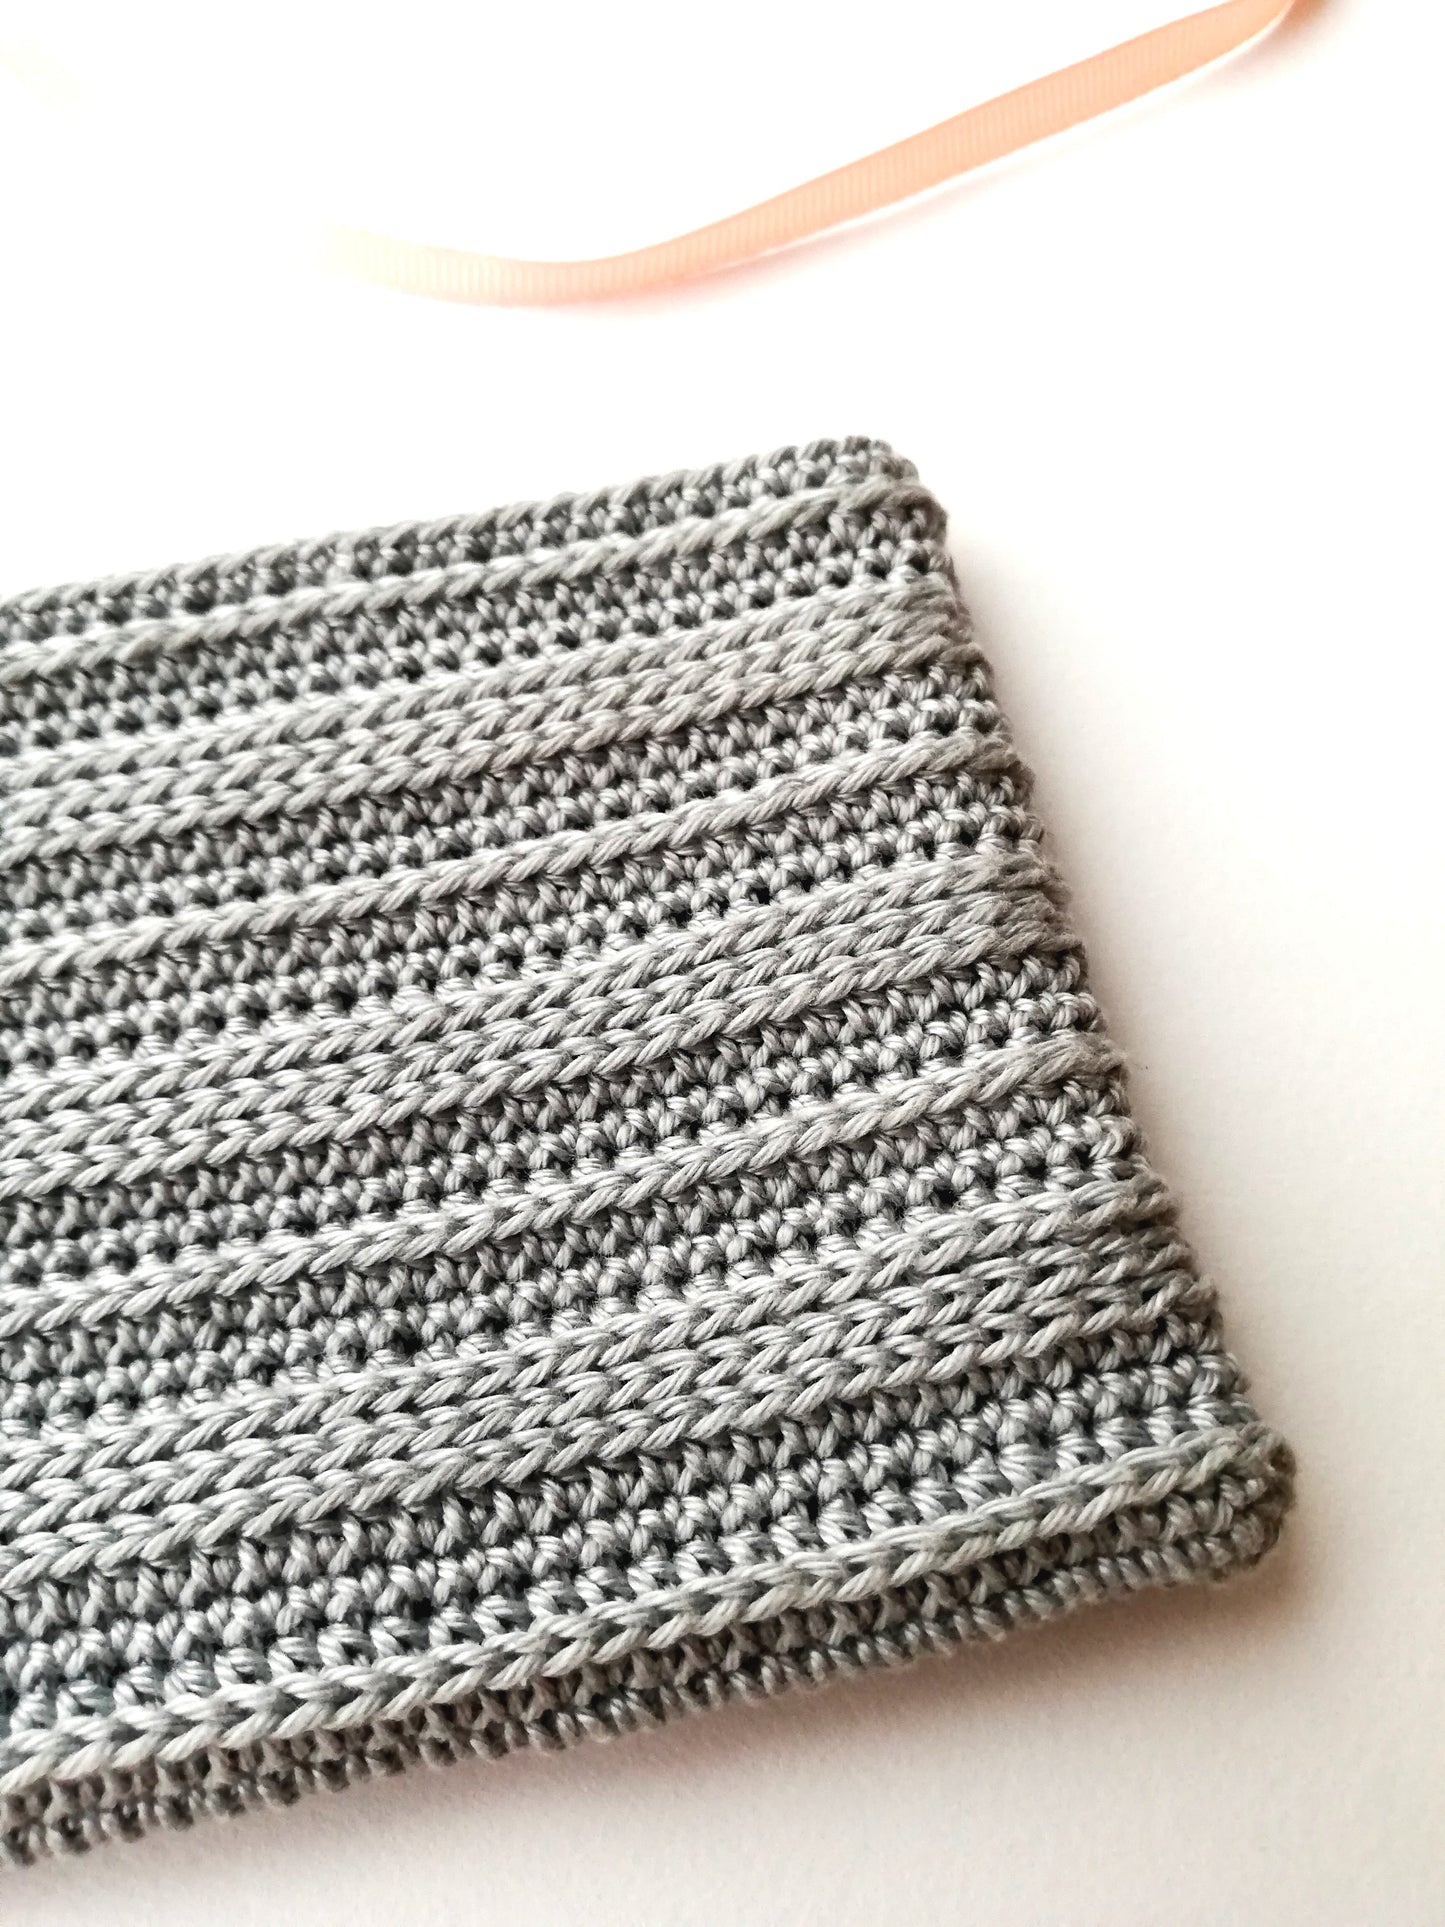 Textured striped pouch